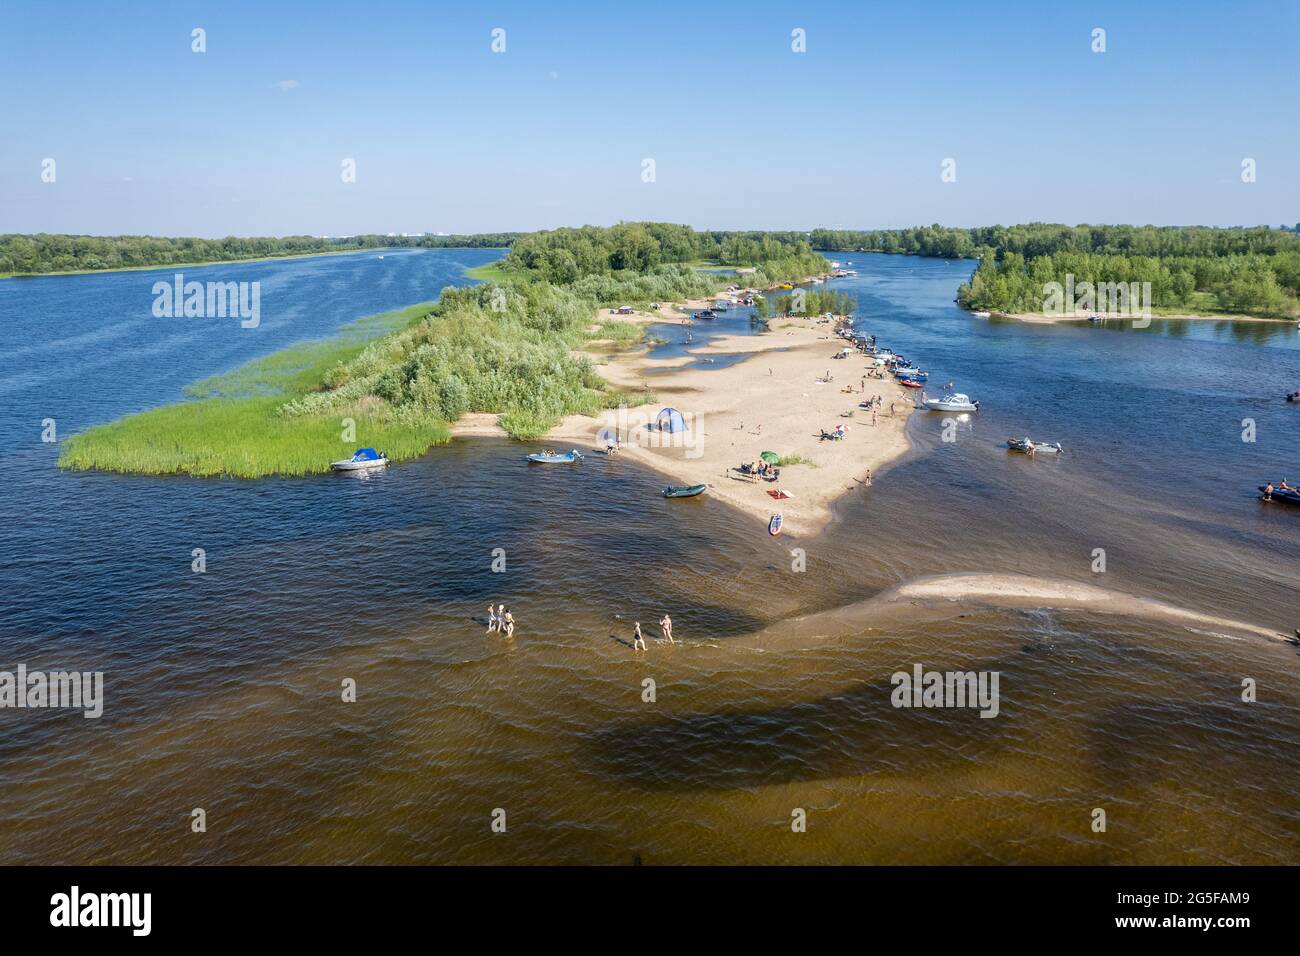 Summer recreation on river beach, aerial view Stock Photo